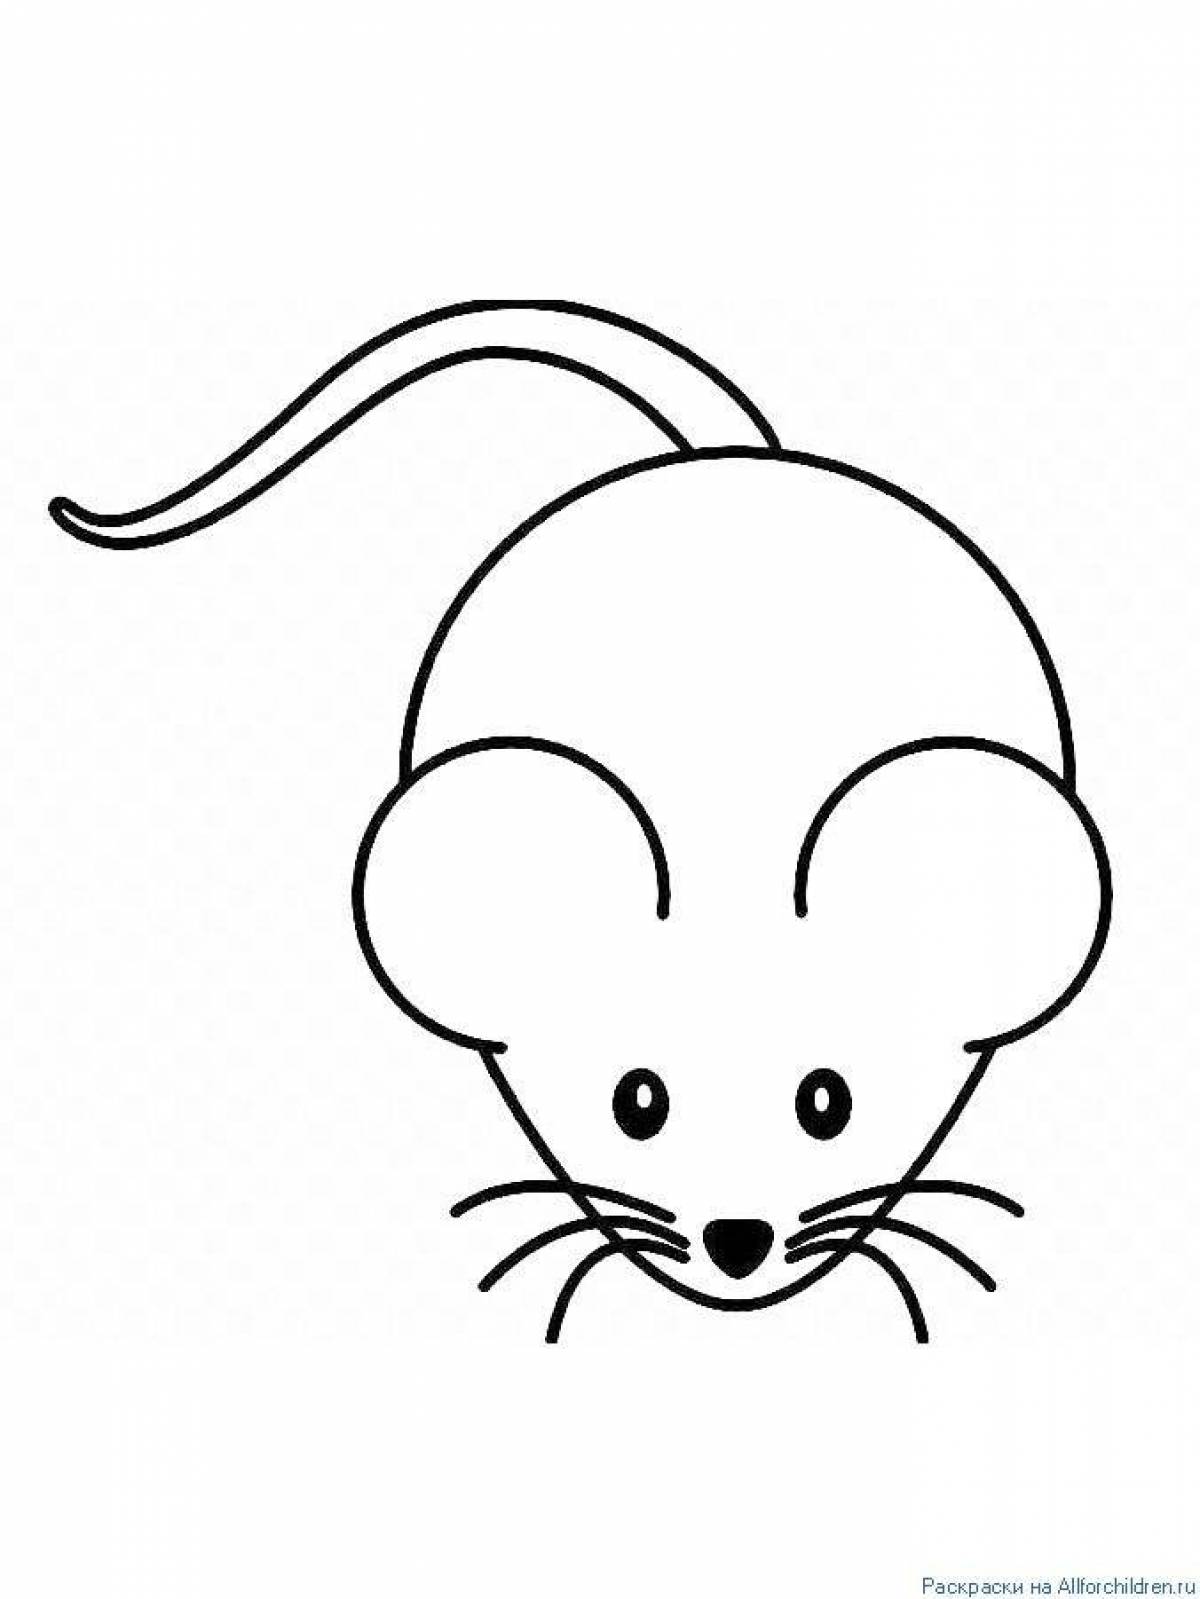 Incredible mouse coloring book for kids